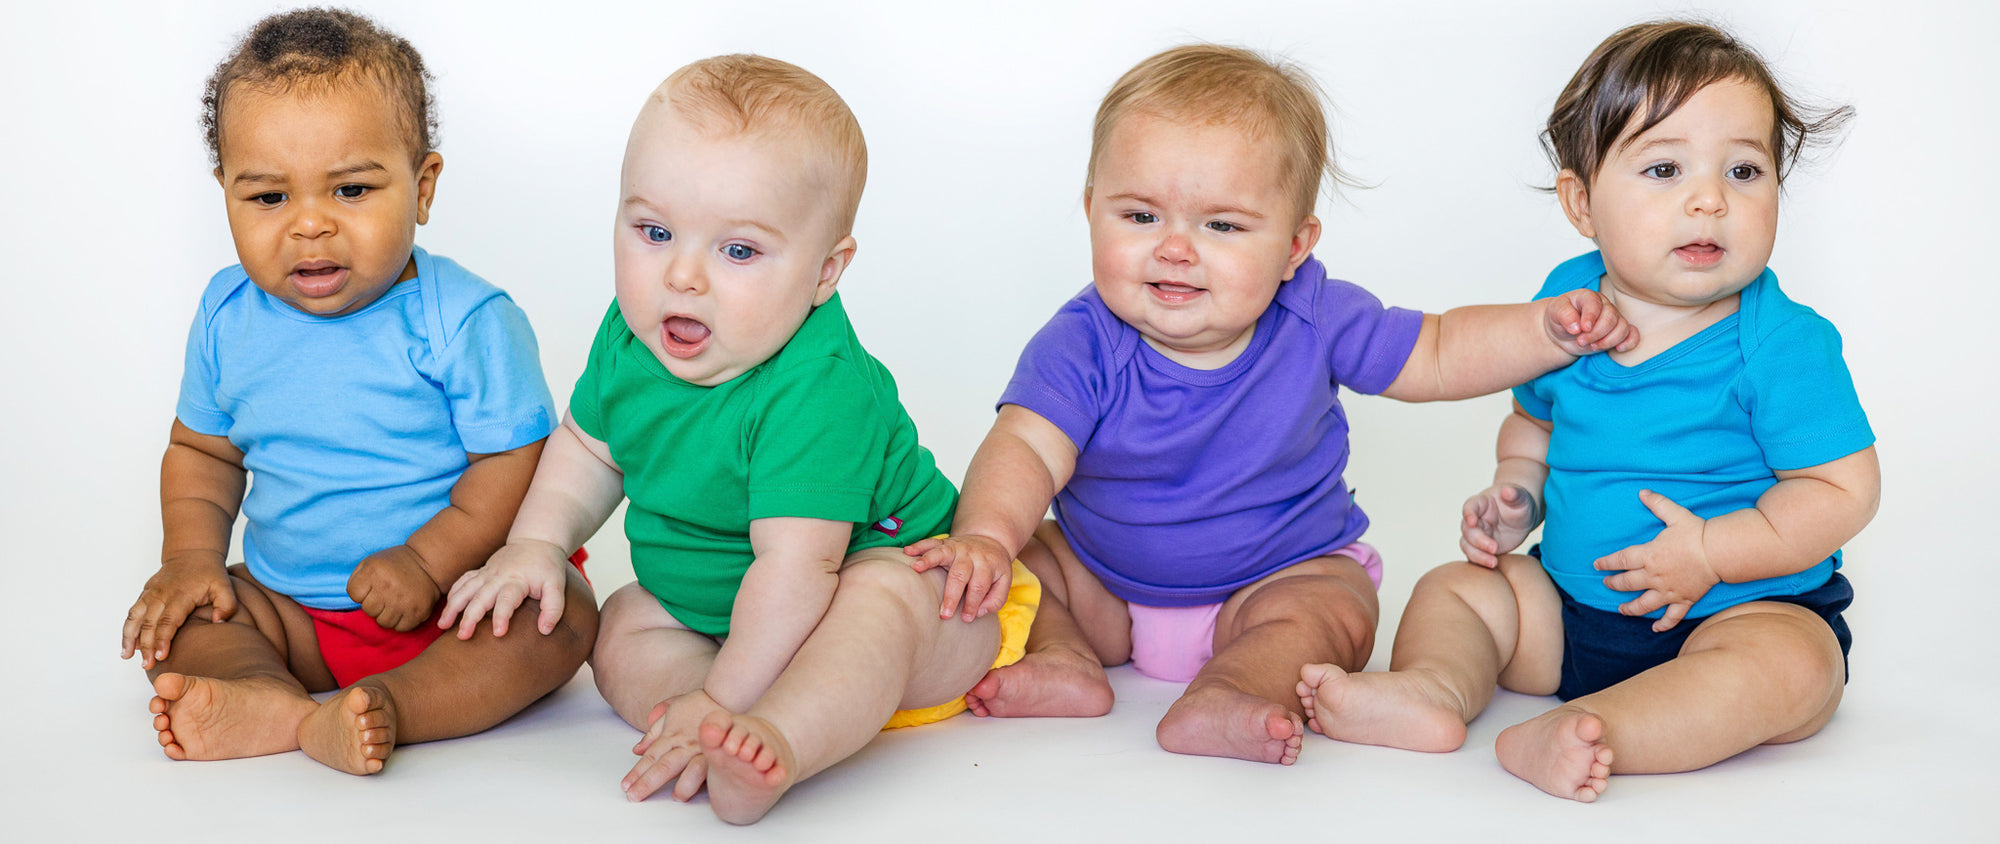 Four babies wearing organic cotton short sleeve onesies and diaper covers